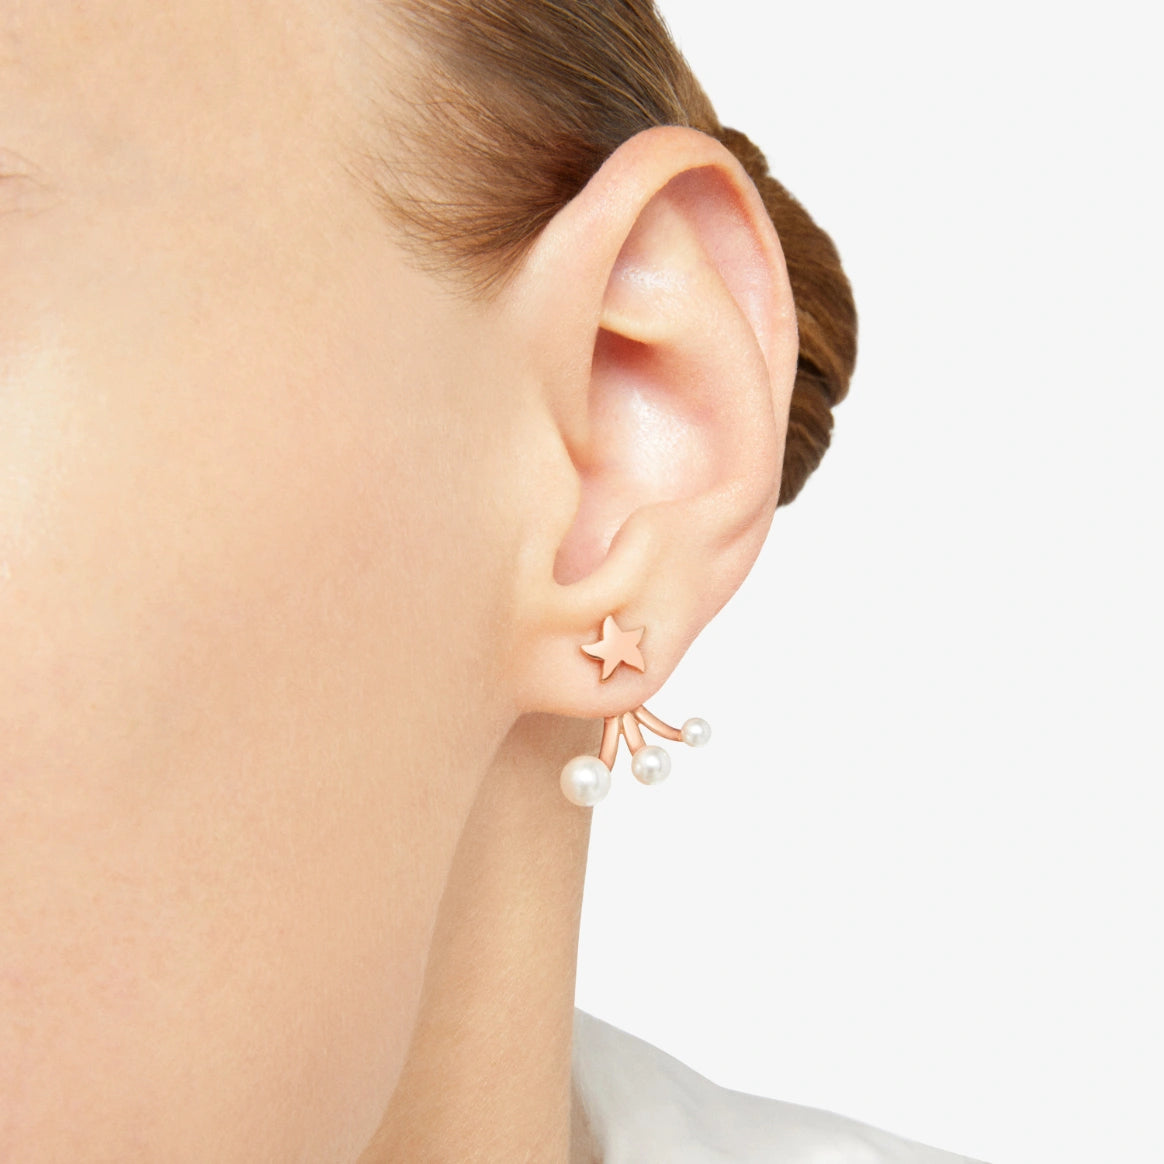 DoDo Stellina Earring in 9K Rose Gold with Crystal Beads - Orsini Jewellers